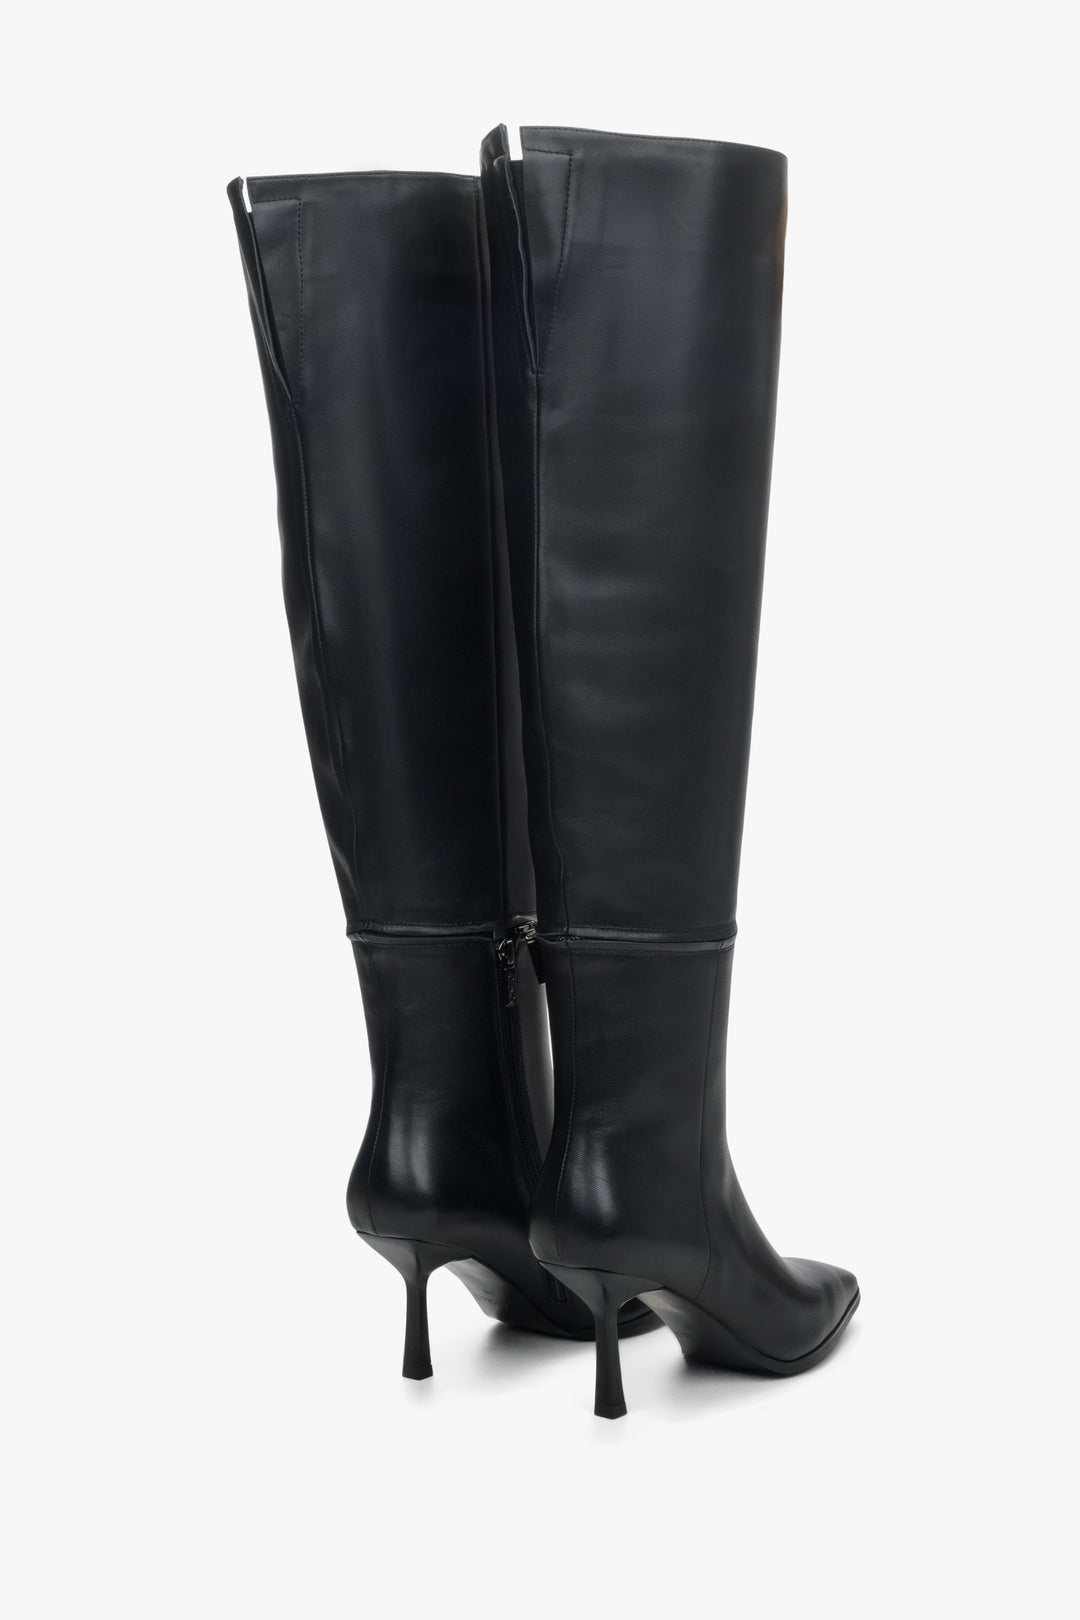 Women's black leather unfastened boots by Estro - close-up on the heel and side stripe of the shoes.